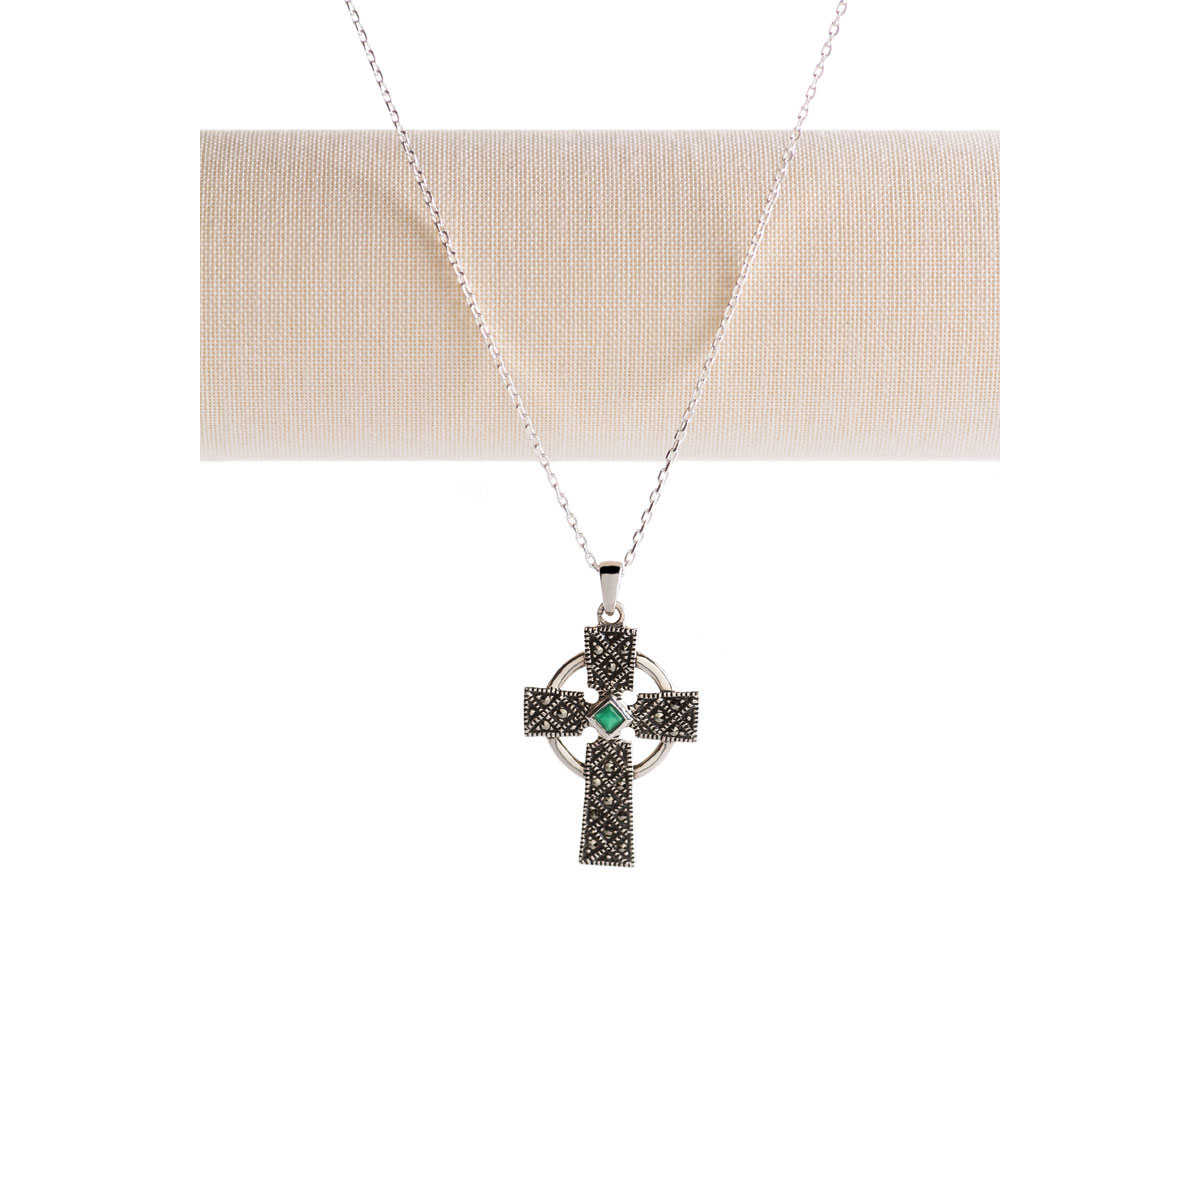 Cashs Ireland, Sterling Silver Cross Pendant With Emerald Gemstone Necklace